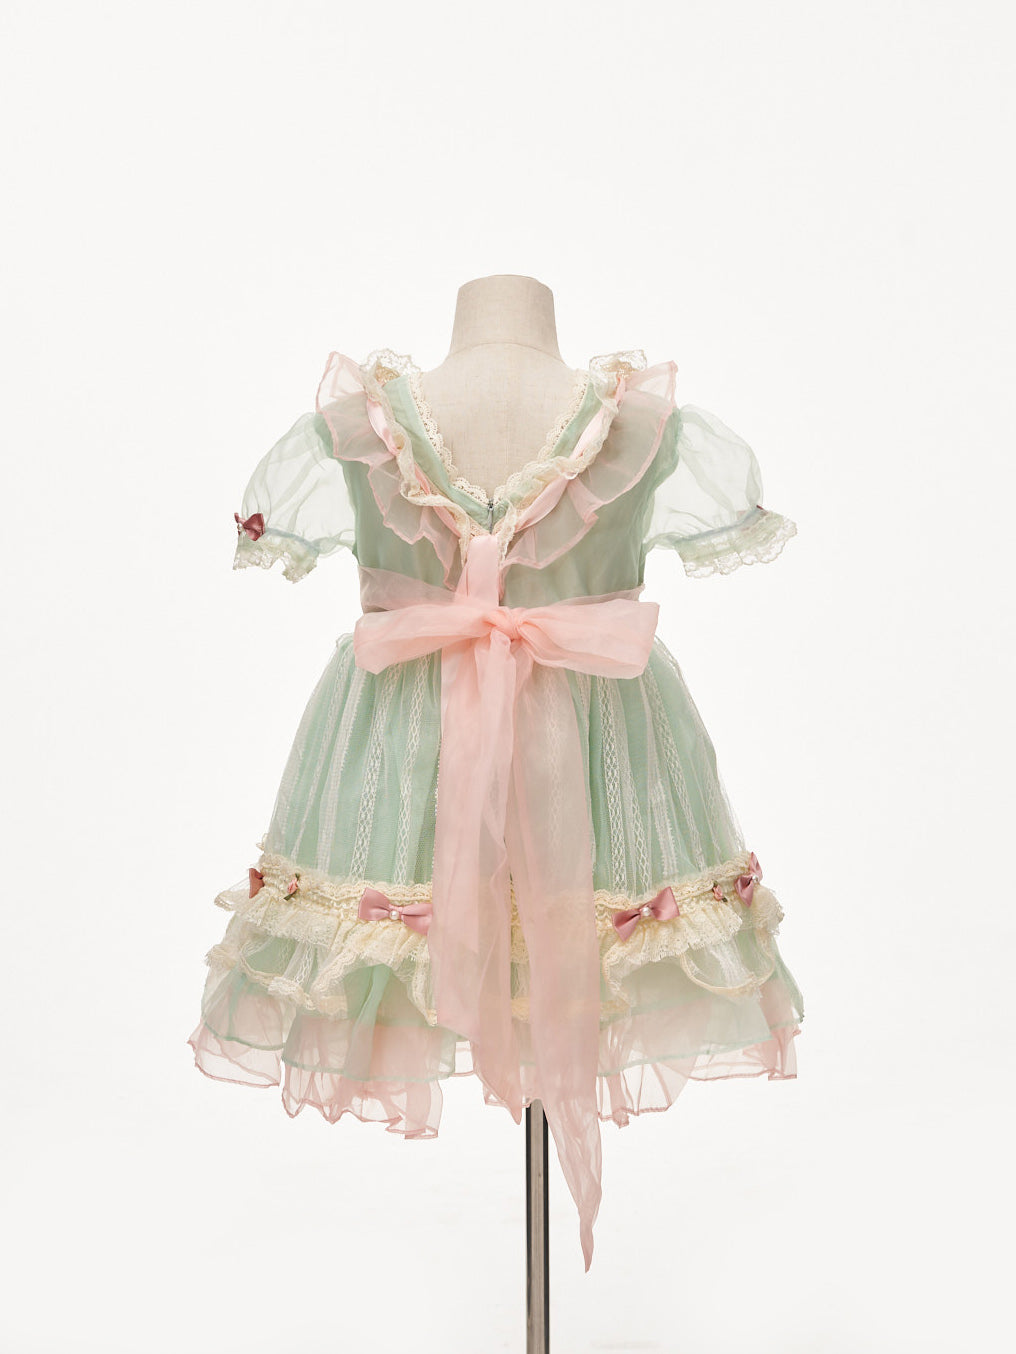 Kate Light Green Bow Tulle Kids Dress for Photography